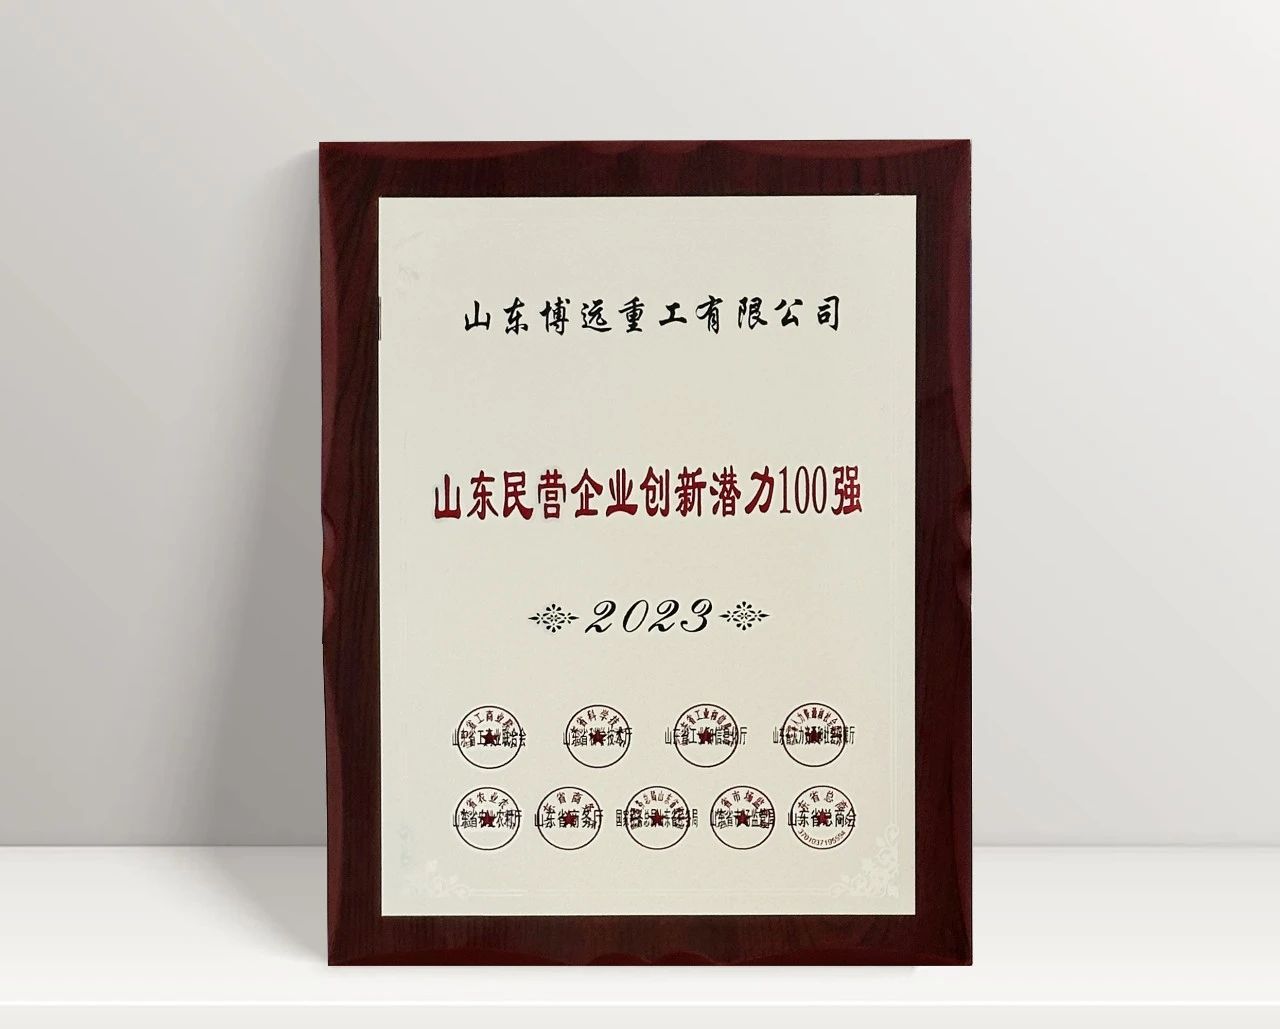 Good news | Boyoun was selected as one of the top 100 private enterprises with innovation potential in Shandong in 2023